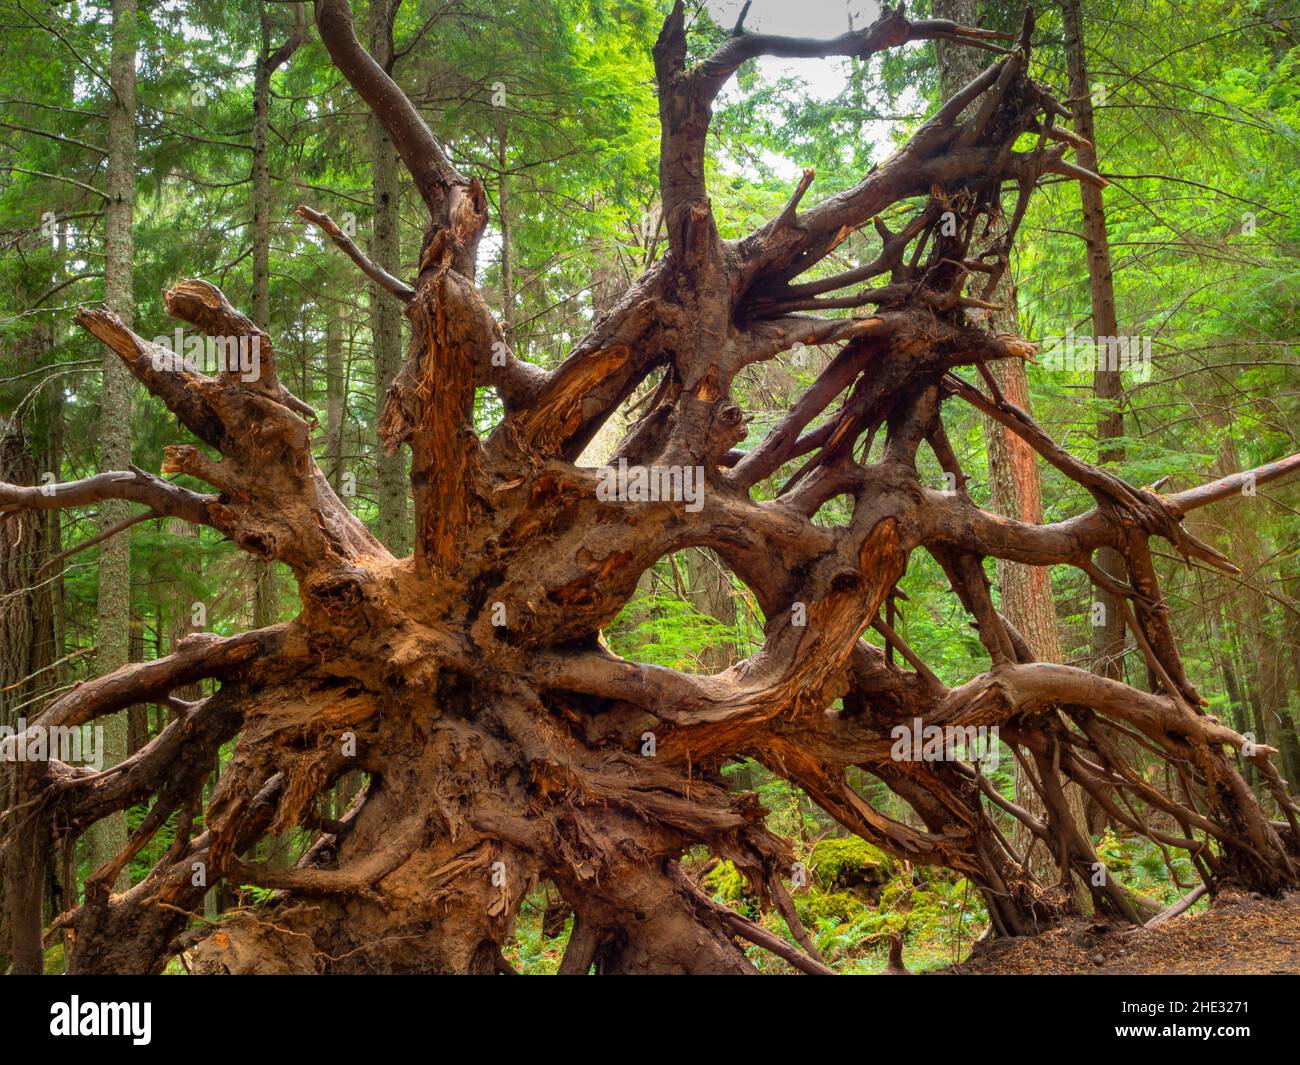 WA21019-00...WASHINGTON - A complicated root ball located along the Cascade Creek trail in Moran State Park on Orcas Island. Stock Photo